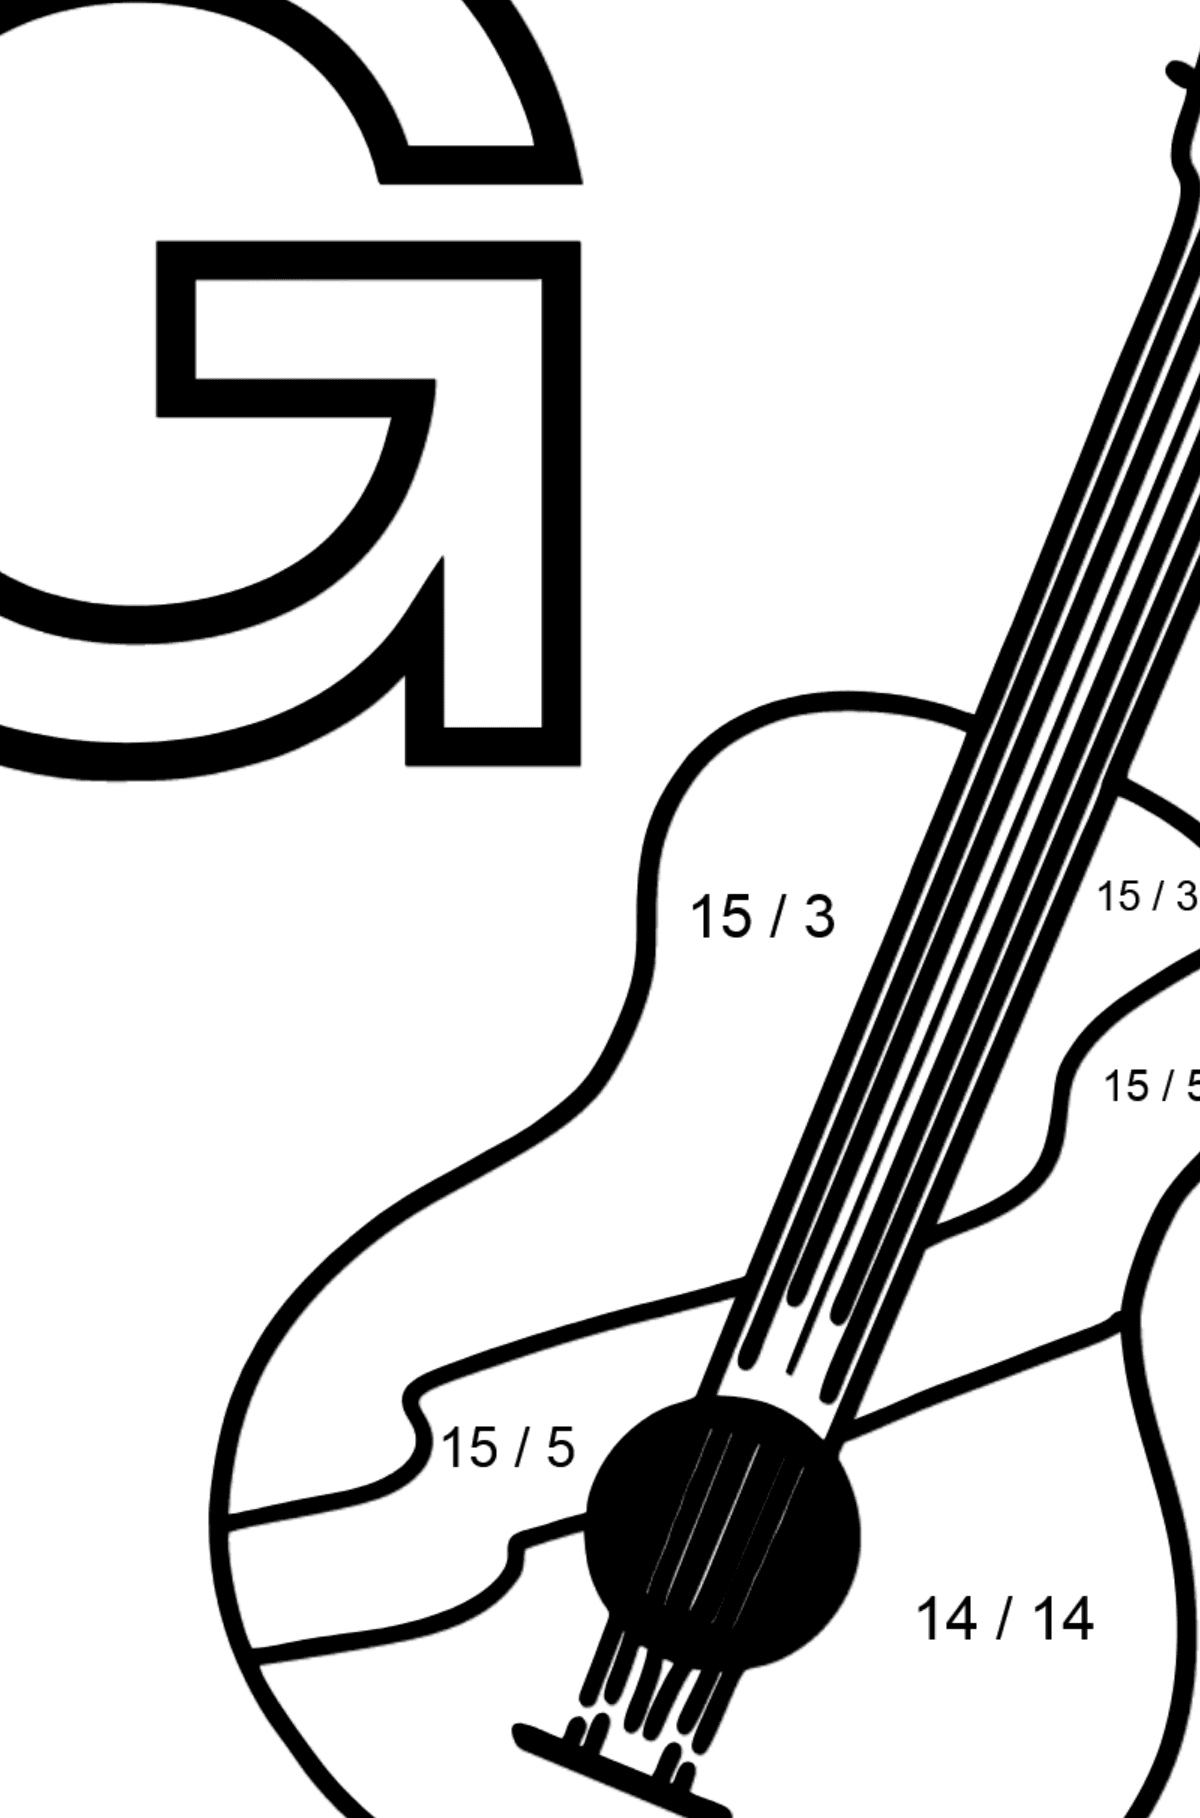 Spanish Letter G coloring pages - GUITARRA - Math Coloring - Division for Kids